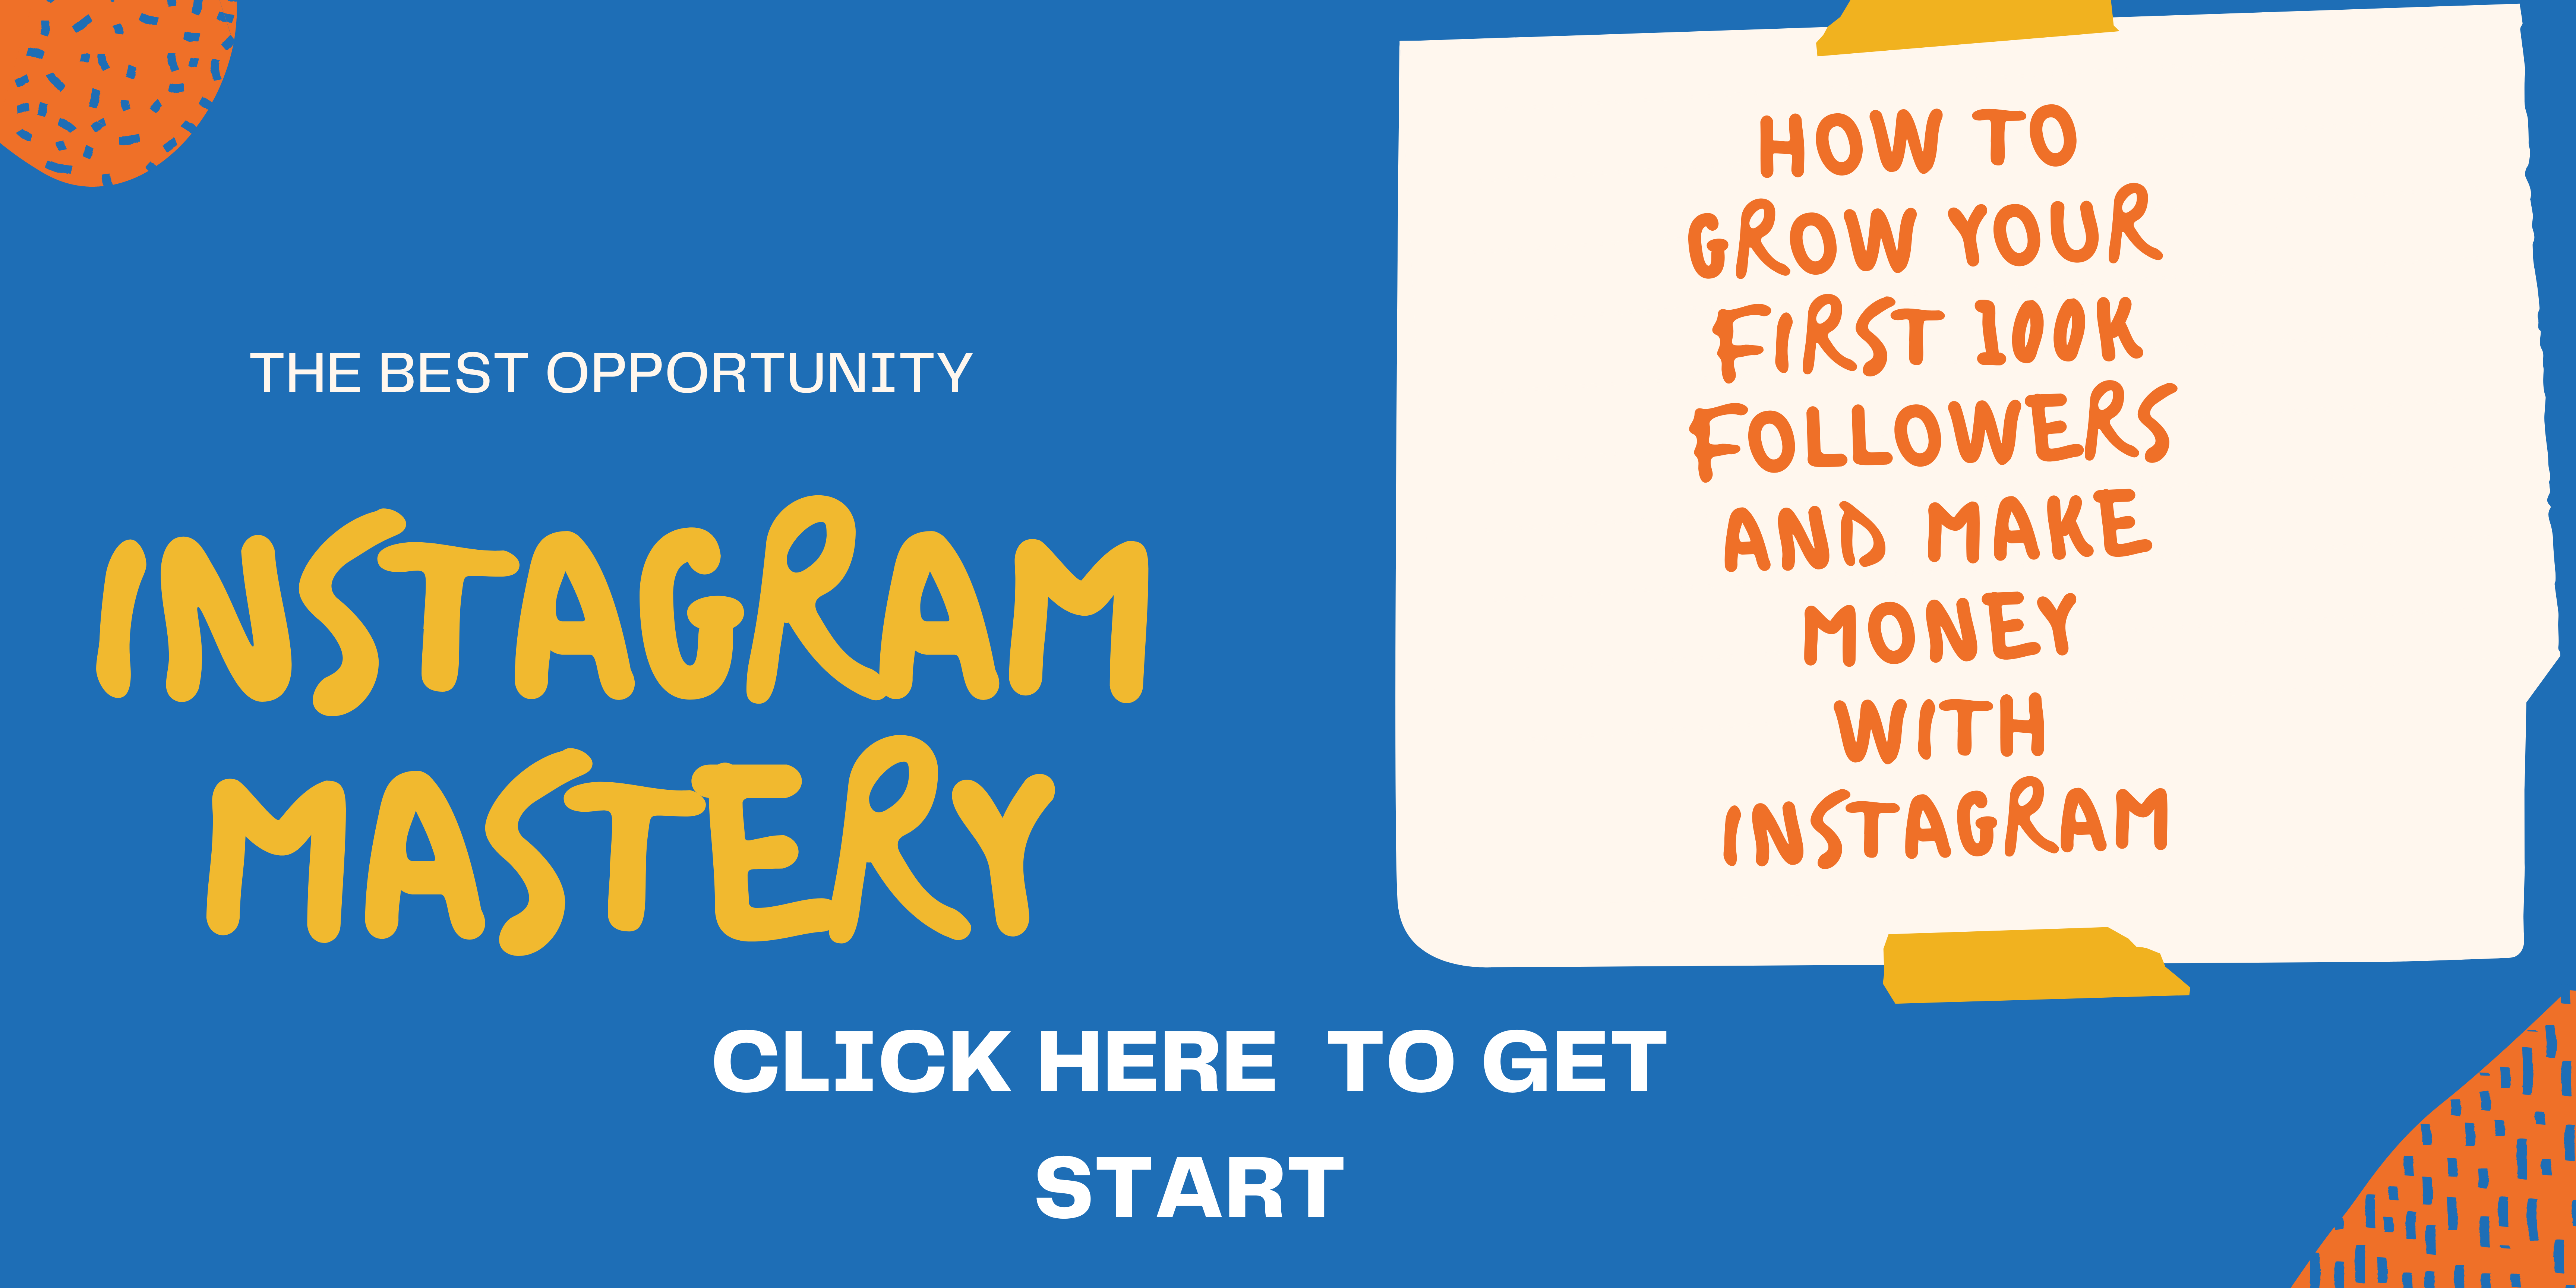 INSTAGRAM MASTERY HOW TO GROW YOUR FIRST 100K FOLLOWERS, ORGANICALLY INSTAGRAM FOLLOWERS INCREASING, MAKE MONEY WITH SOCIAL MEDIA, WORK FORM HOME, HASHTAGS, INSTAGRAM FOLLOWERS, EARNING TIPS, EARN FROM HOME, ONLINE EARN FROM HOME, 100K FOLLOWERS AND MAKE MONEY WITH INSTAGRAM, INSTAGRAM MASTERY, MAKE MONEY, ONLINE MAKING MONEY TIPS,